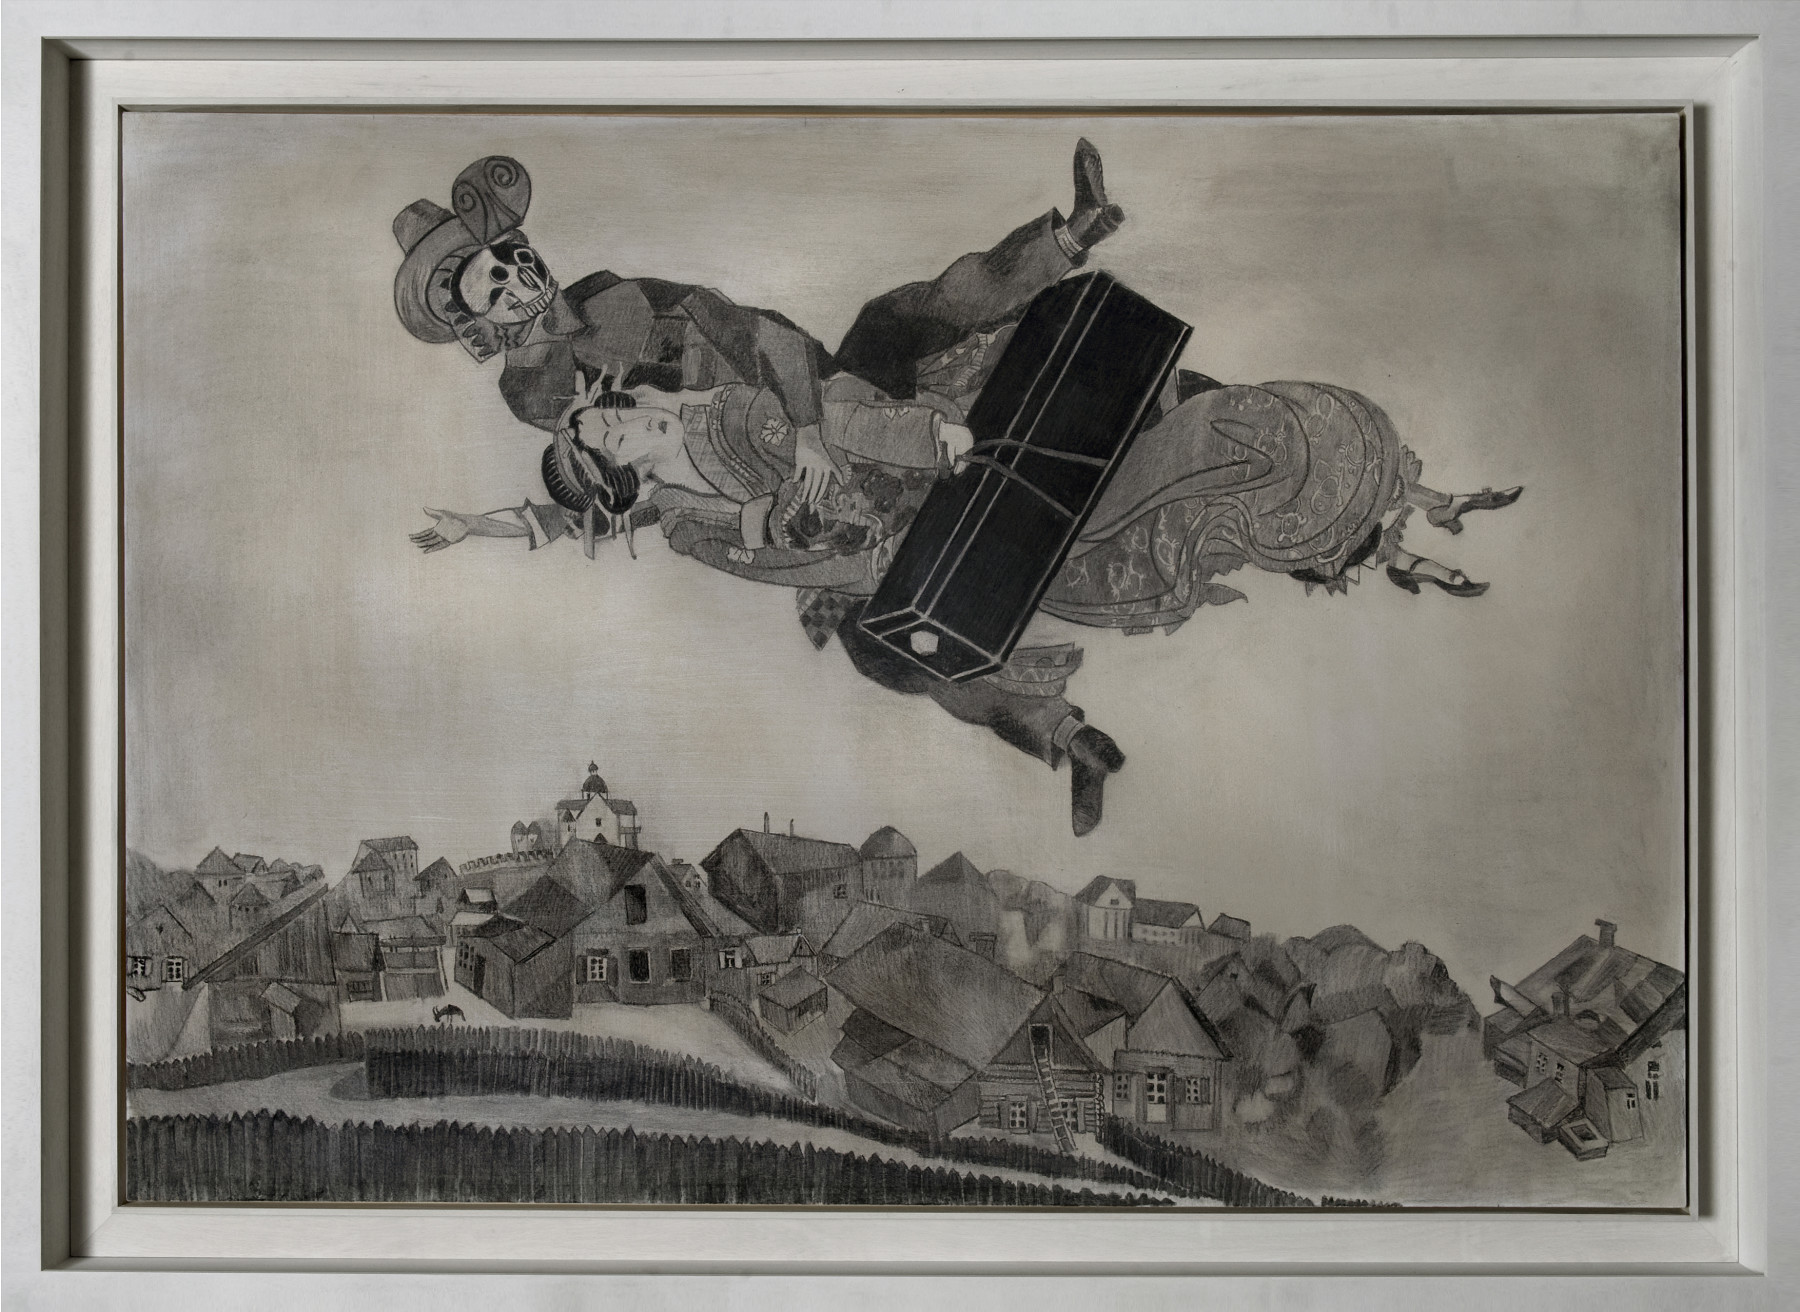 Wolfe von Lenkiewicz, Over the Town (Drawing), 2009